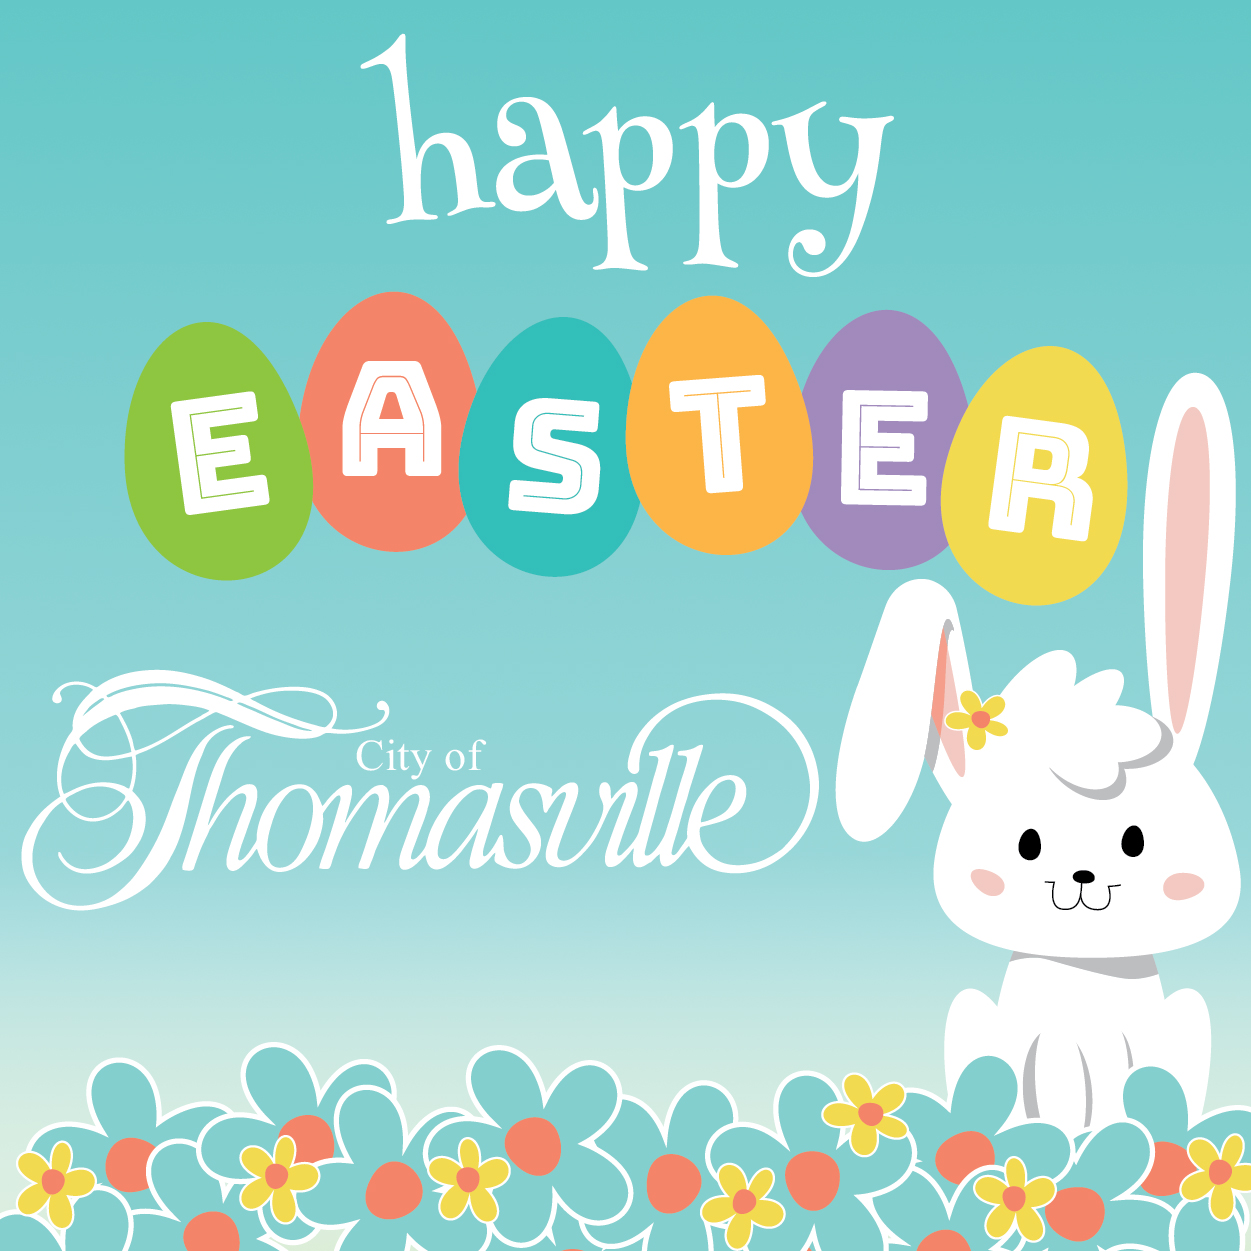 Photo for CITY OF THOMASVILLE TO HOST RE-IMAGINED EASTER EGGSTRAVAGANZA